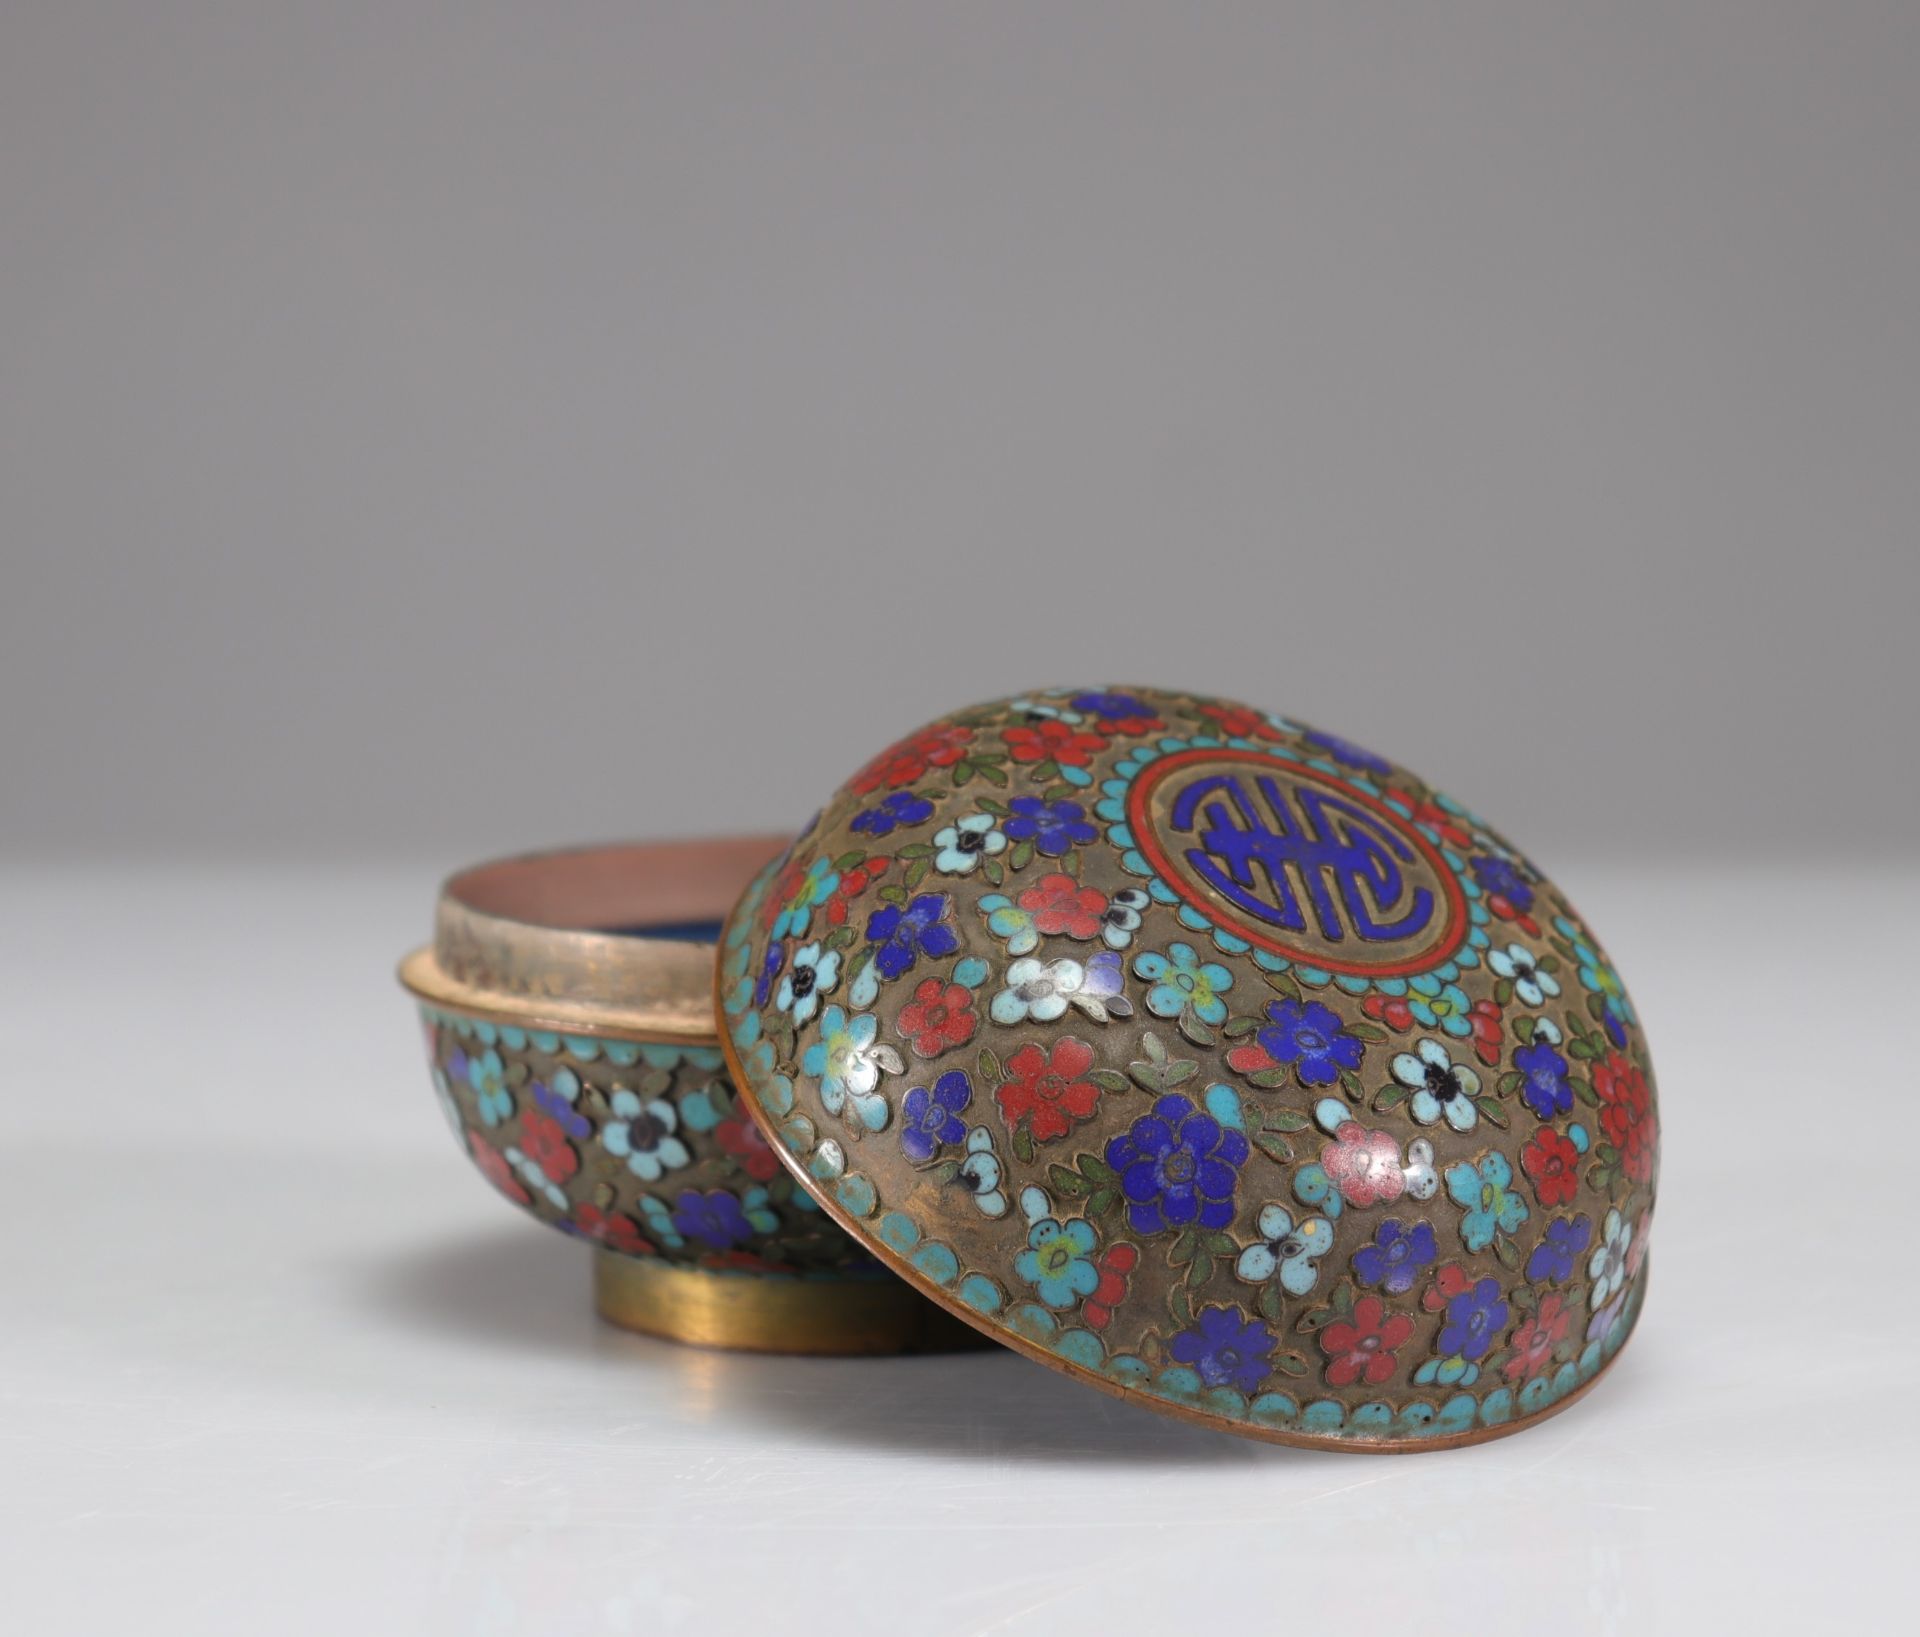 Box covered in cloisonne bonze - Image 2 of 4